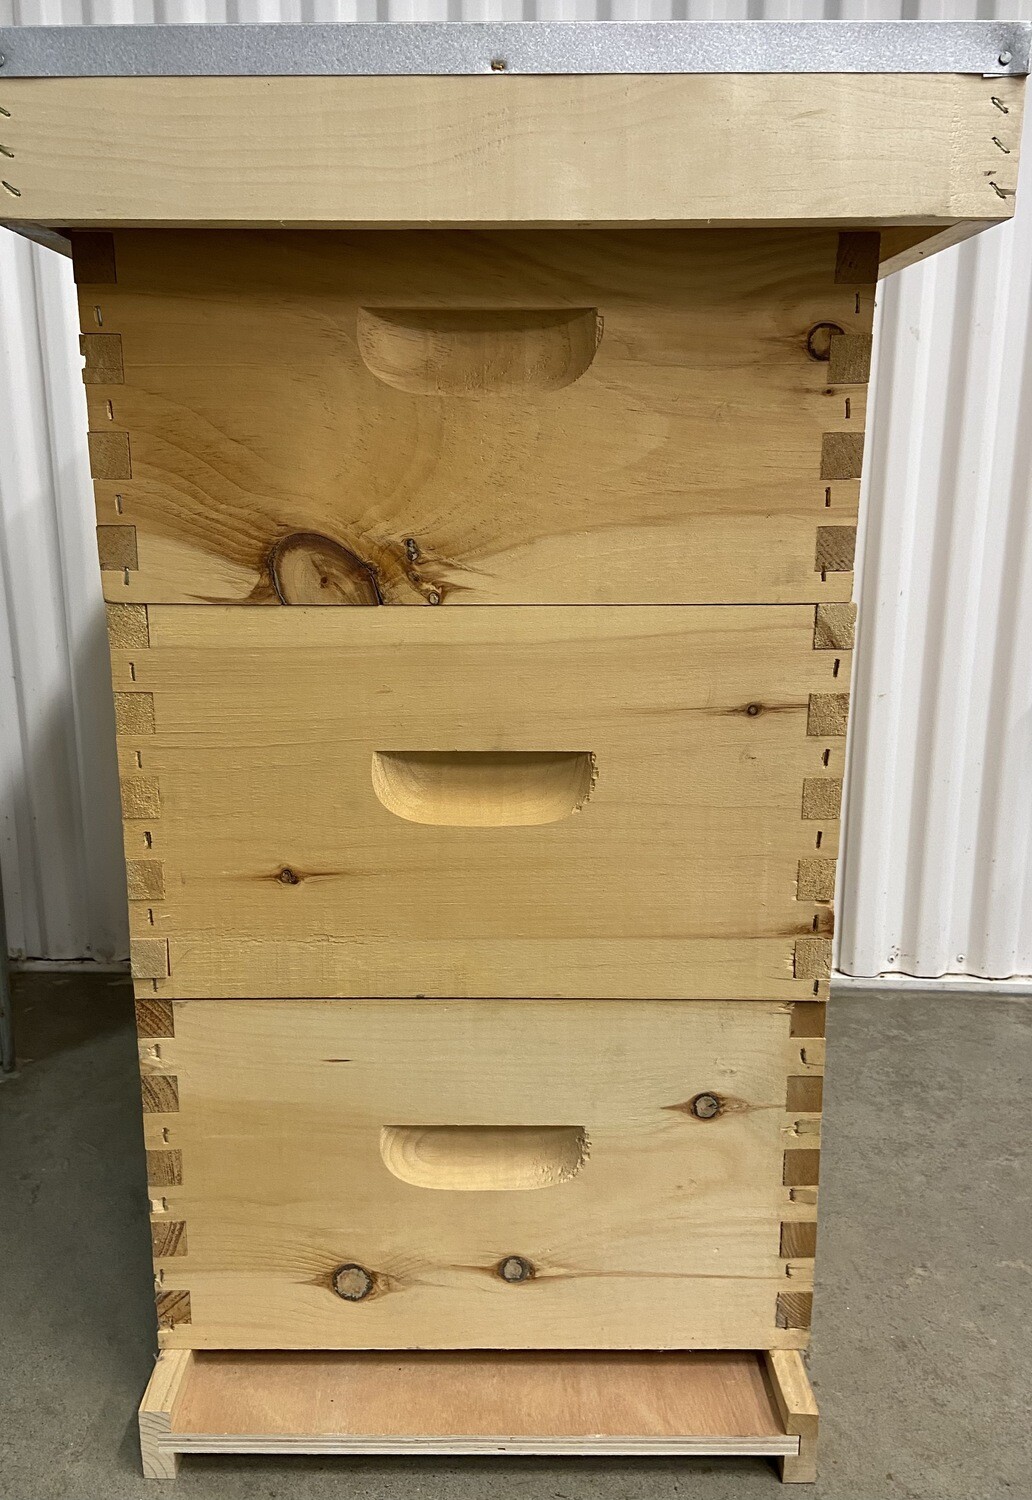 My First Hive Kit